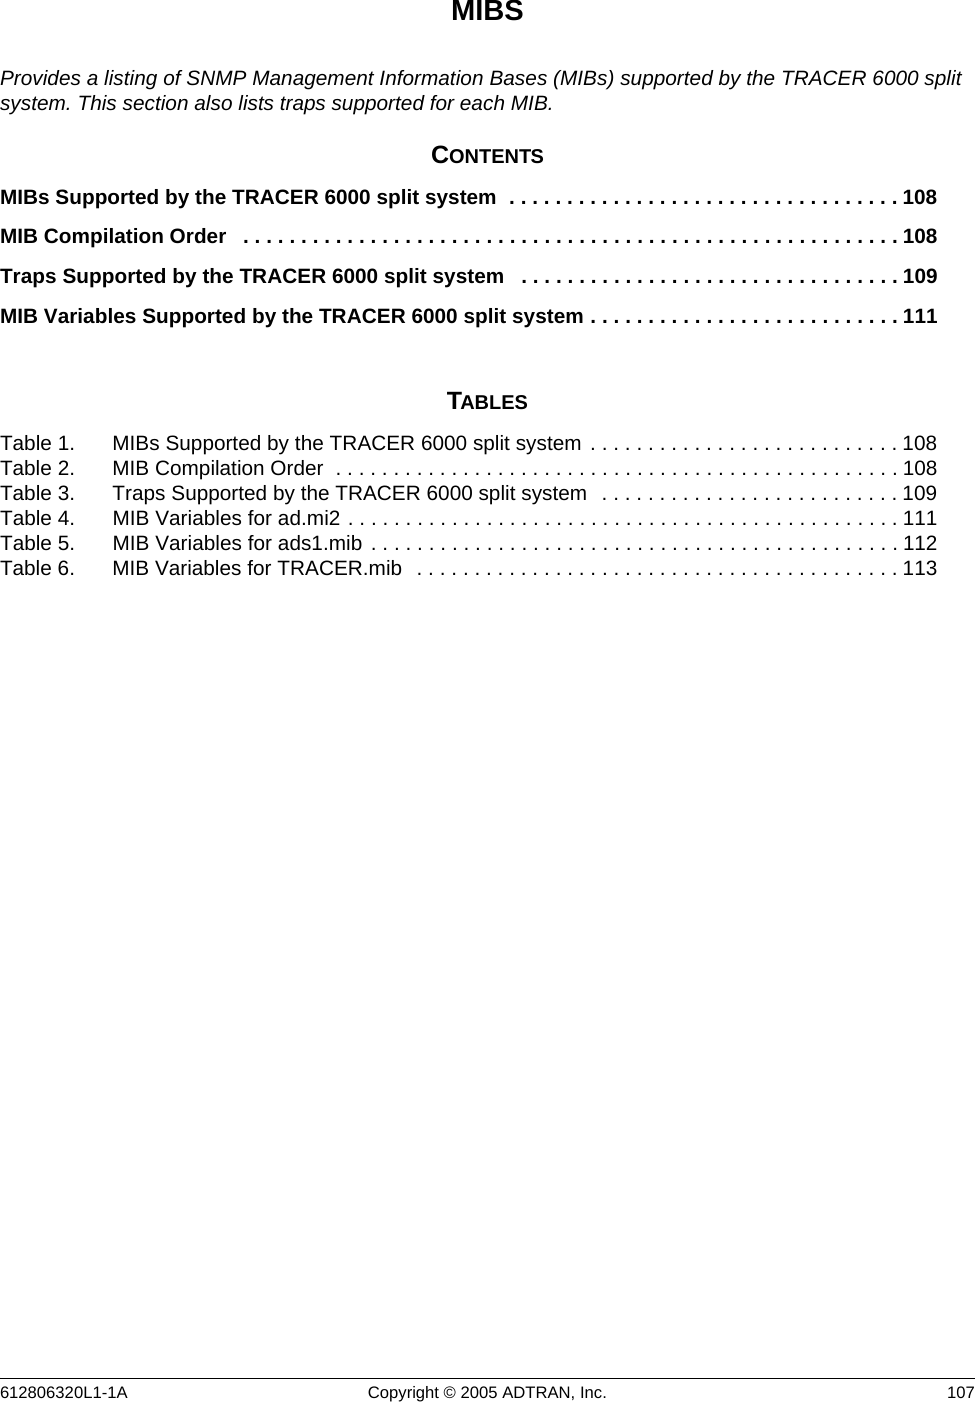 612806320L1-1A Copyright © 2005 ADTRAN, Inc.  107MIBSProvides a listing of SNMP Management Information Bases (MIBs) supported by the TRACER 6000 split system. This section also lists traps supported for each MIB.CONTENTSMIBs Supported by the TRACER 6000 split system  . . . . . . . . . . . . . . . . . . . . . . . . . . . . . . . . . . 108MIB Compilation Order   . . . . . . . . . . . . . . . . . . . . . . . . . . . . . . . . . . . . . . . . . . . . . . . . . . . . . . . . . 108Traps Supported by the TRACER 6000 split system   . . . . . . . . . . . . . . . . . . . . . . . . . . . . . . . . . 109MIB Variables Supported by the TRACER 6000 split system . . . . . . . . . . . . . . . . . . . . . . . . . . . 111TABLESTable 1. MIBs Supported by the TRACER 6000 split system . . . . . . . . . . . . . . . . . . . . . . . . . . . 108Table 2. MIB Compilation Order  . . . . . . . . . . . . . . . . . . . . . . . . . . . . . . . . . . . . . . . . . . . . . . . . .108Table 3. Traps Supported by the TRACER 6000 split system   . . . . . . . . . . . . . . . . . . . . . . . . . . 109Table 4. MIB Variables for ad.mi2 . . . . . . . . . . . . . . . . . . . . . . . . . . . . . . . . . . . . . . . . . . . . . . . .111Table 5. MIB Variables for ads1.mib  . . . . . . . . . . . . . . . . . . . . . . . . . . . . . . . . . . . . . . . . . . . . . . 112Table 6. MIB Variables for TRACER.mib   . . . . . . . . . . . . . . . . . . . . . . . . . . . . . . . . . . . . . . . . . . 113